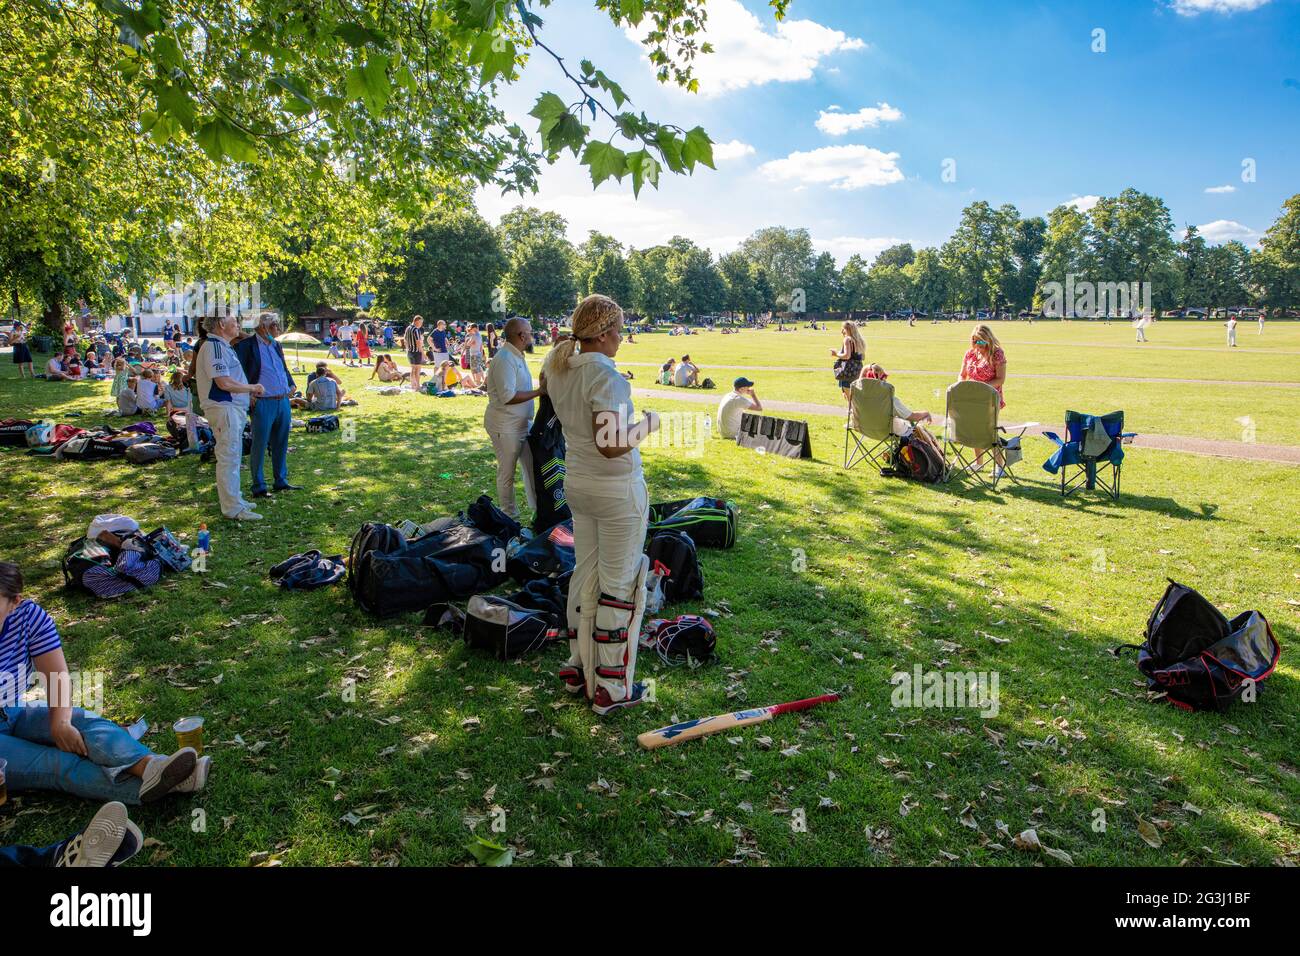 Amateur cricket match on Richmond Green, in Richmond, Surrey, UK; the team in whites preparing to go out to bat, including a woman cricketer Stock Photo